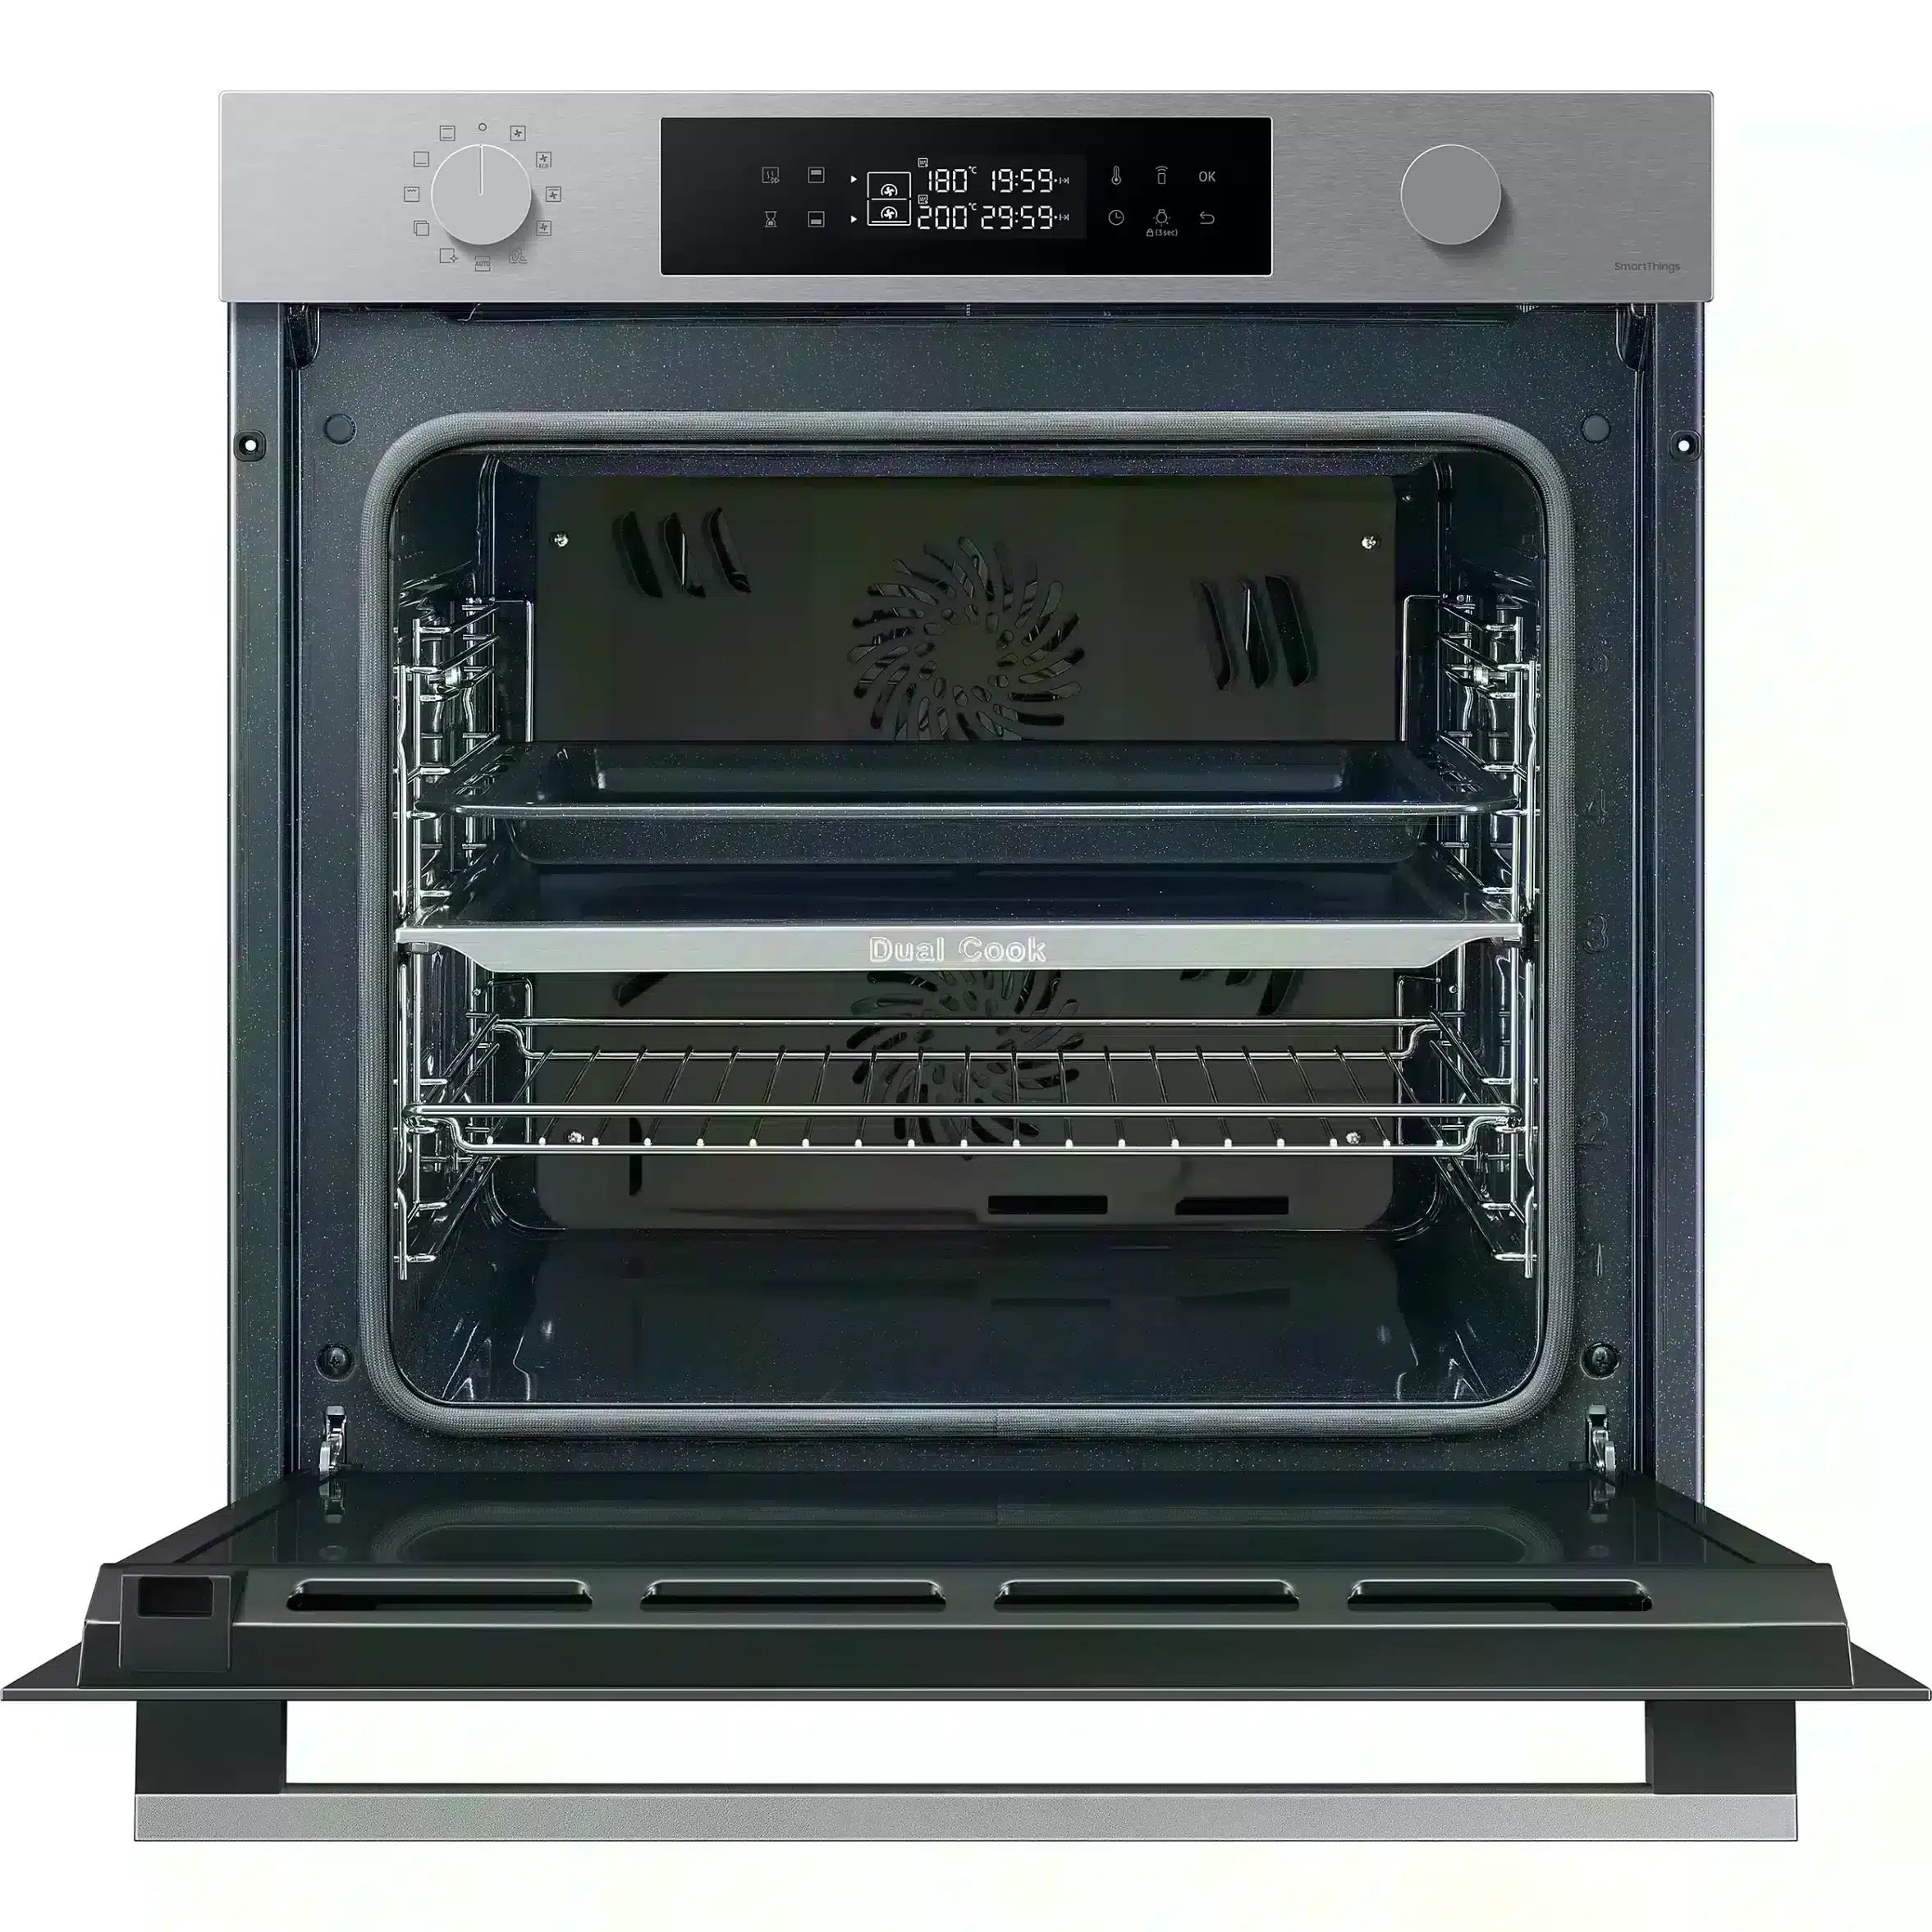 Samsung NV7B44205AS Built-in Single electric multifunction Oven - Stainless steel effect-6894